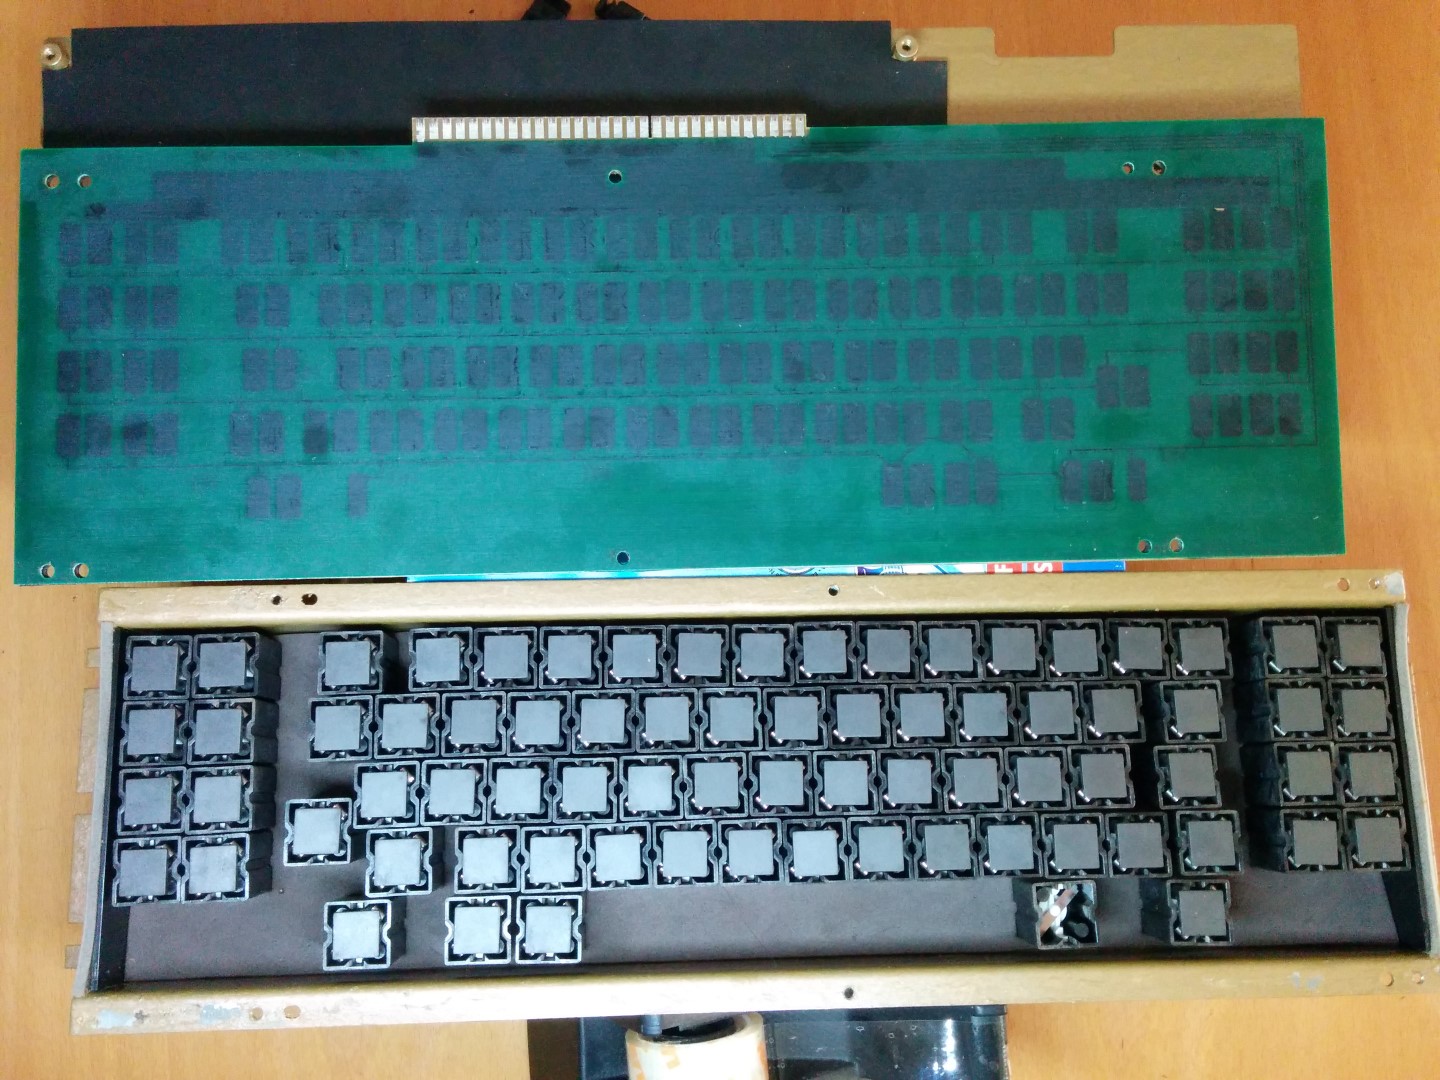 PCB and switches before reassembly